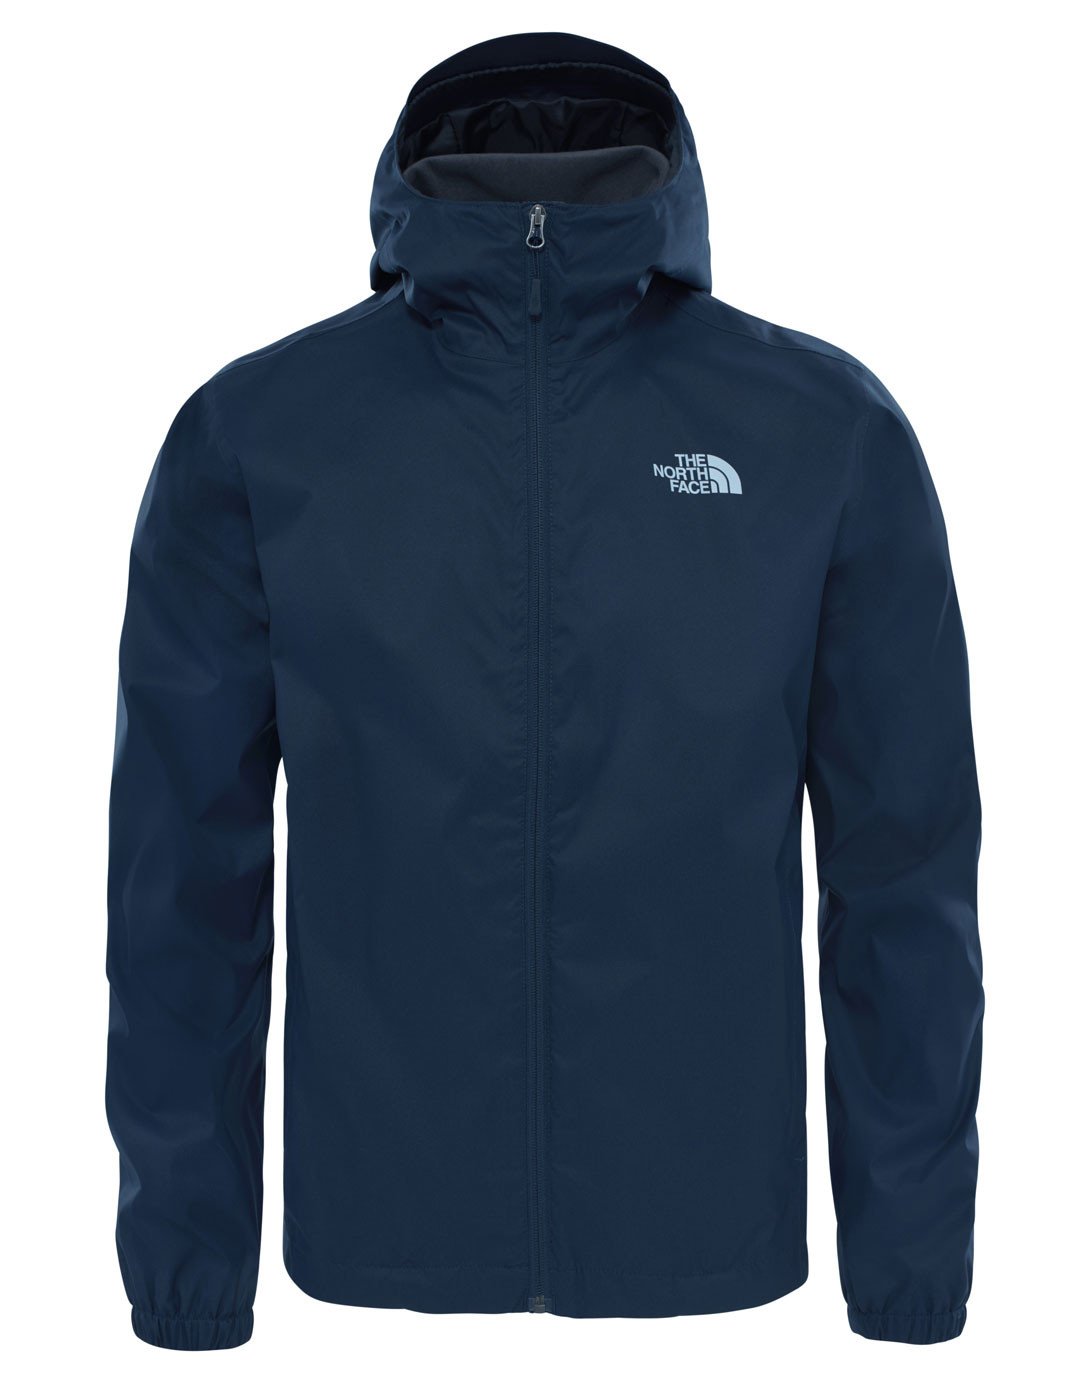 The North Face Mens Quest Jacket - Urban Navy | Simply Hike UK